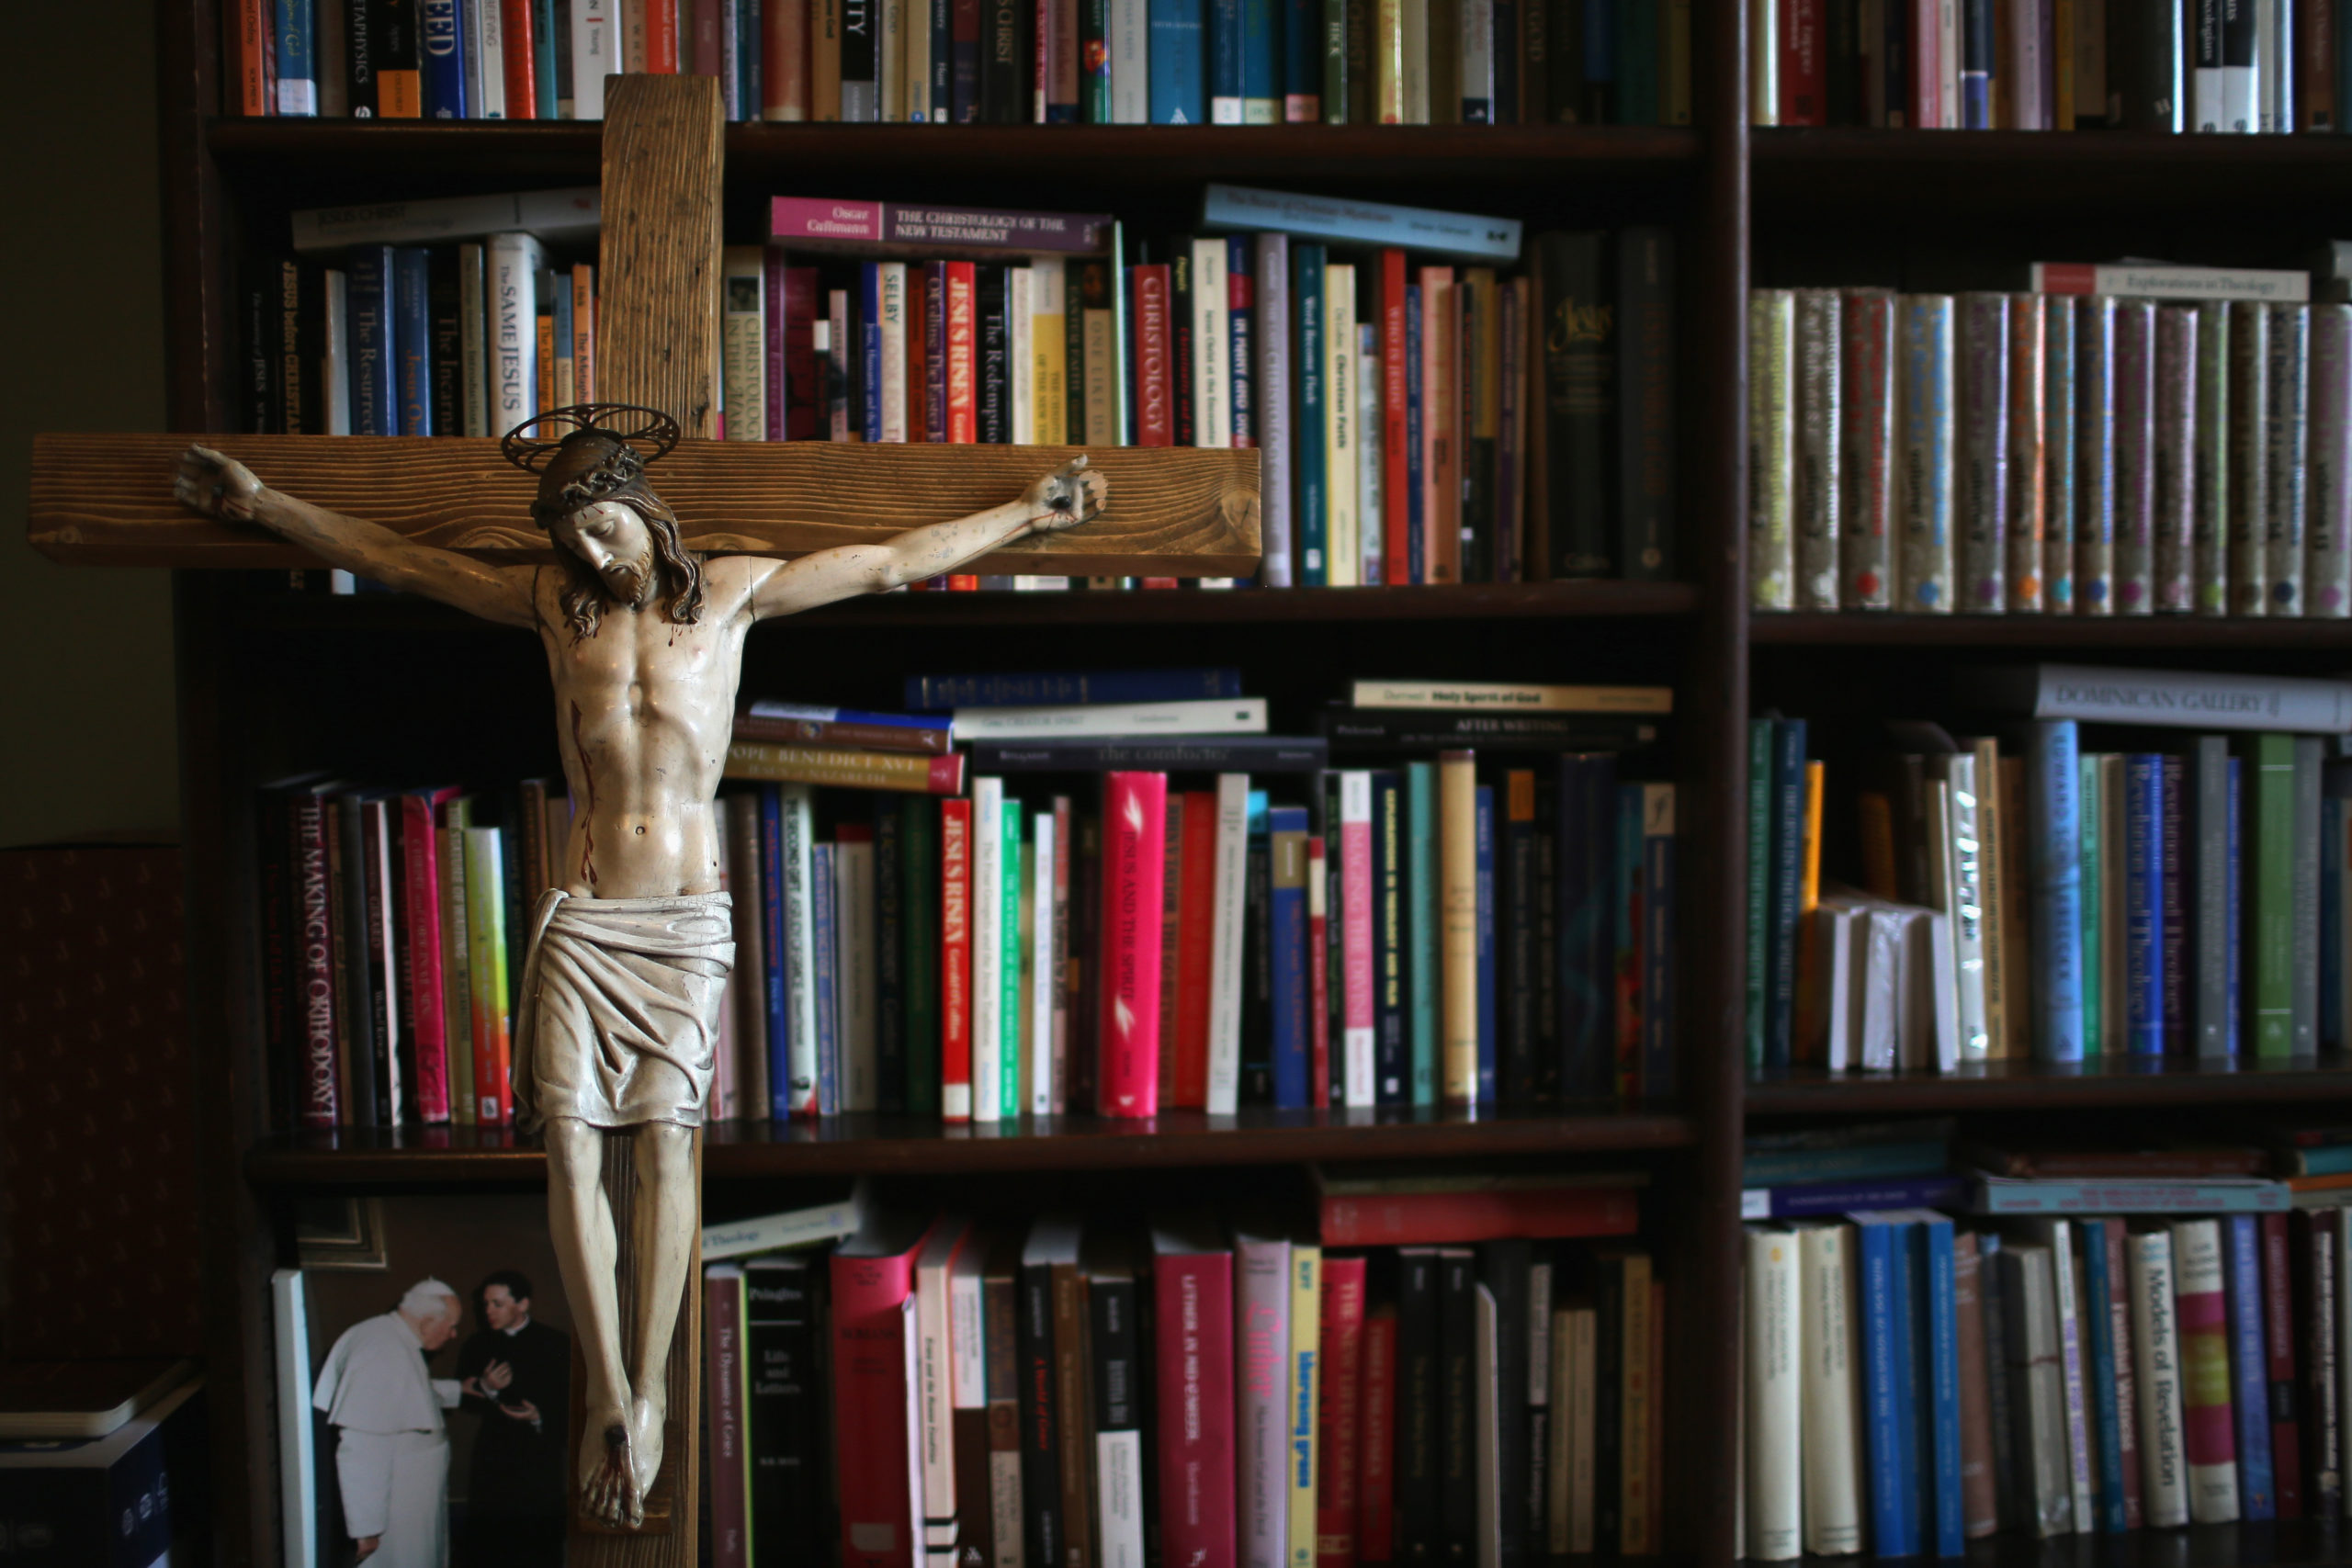 BIRMINGHAM, ENGLAND - AUGUST 11:A crucifx leans against religious academic books at Oscott College on May 8, 2014 in Birmingham, England. St. Mary's College, Oscott opened in 1794 and was designed by the gothic architect Augustus Welby Pugin. The formation for catholic priesthood takes six years living in the college of seminarians dedicated to prayer, study and pastoral work in the local community. During the first three years a seminarian progresses to the ministries of Lector and Acolyte, in readiness for a pastoral role in his home diocese. the seminarian returns to his studies and at the end of his fourth year is accepted as a candidate for Holy Orders. After five years he is ordained a deacon in the college chapel and, finally ordained priest in his home diocese at the end of his sixth year. (Photo by Christopher Furlong/Getty Images)